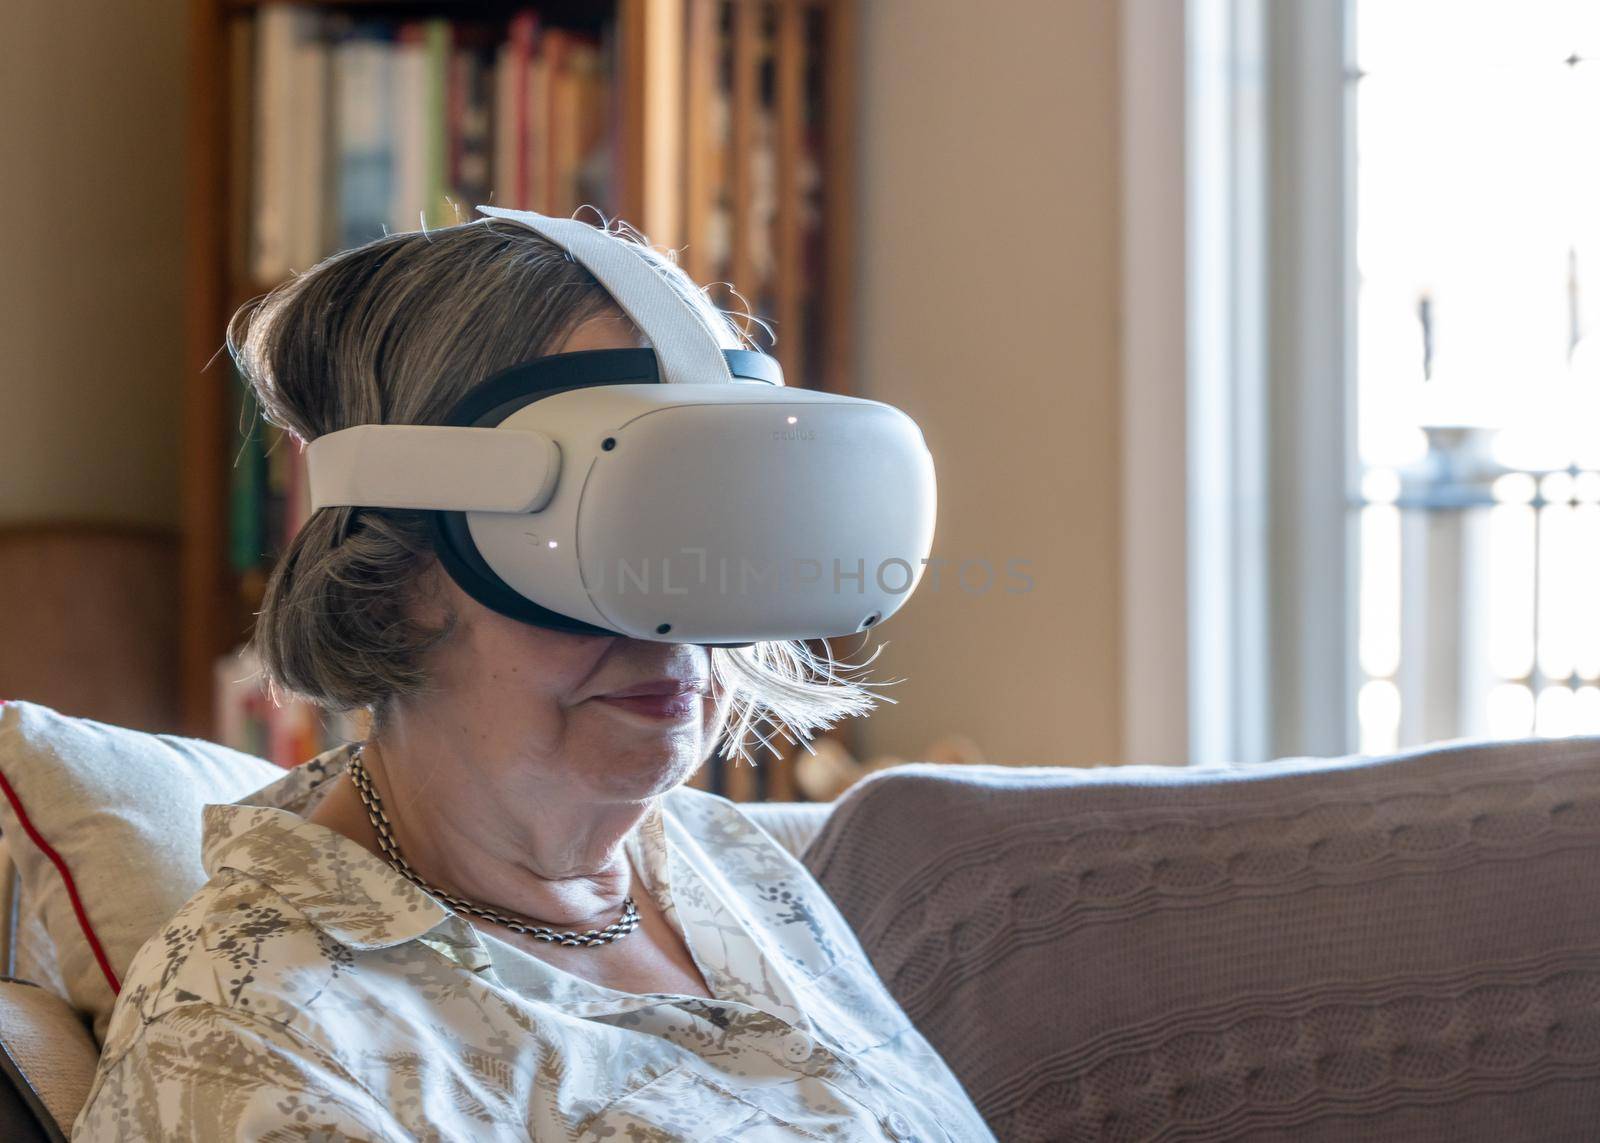 Senior adult woman watching an app on a modern VR headset by steheap